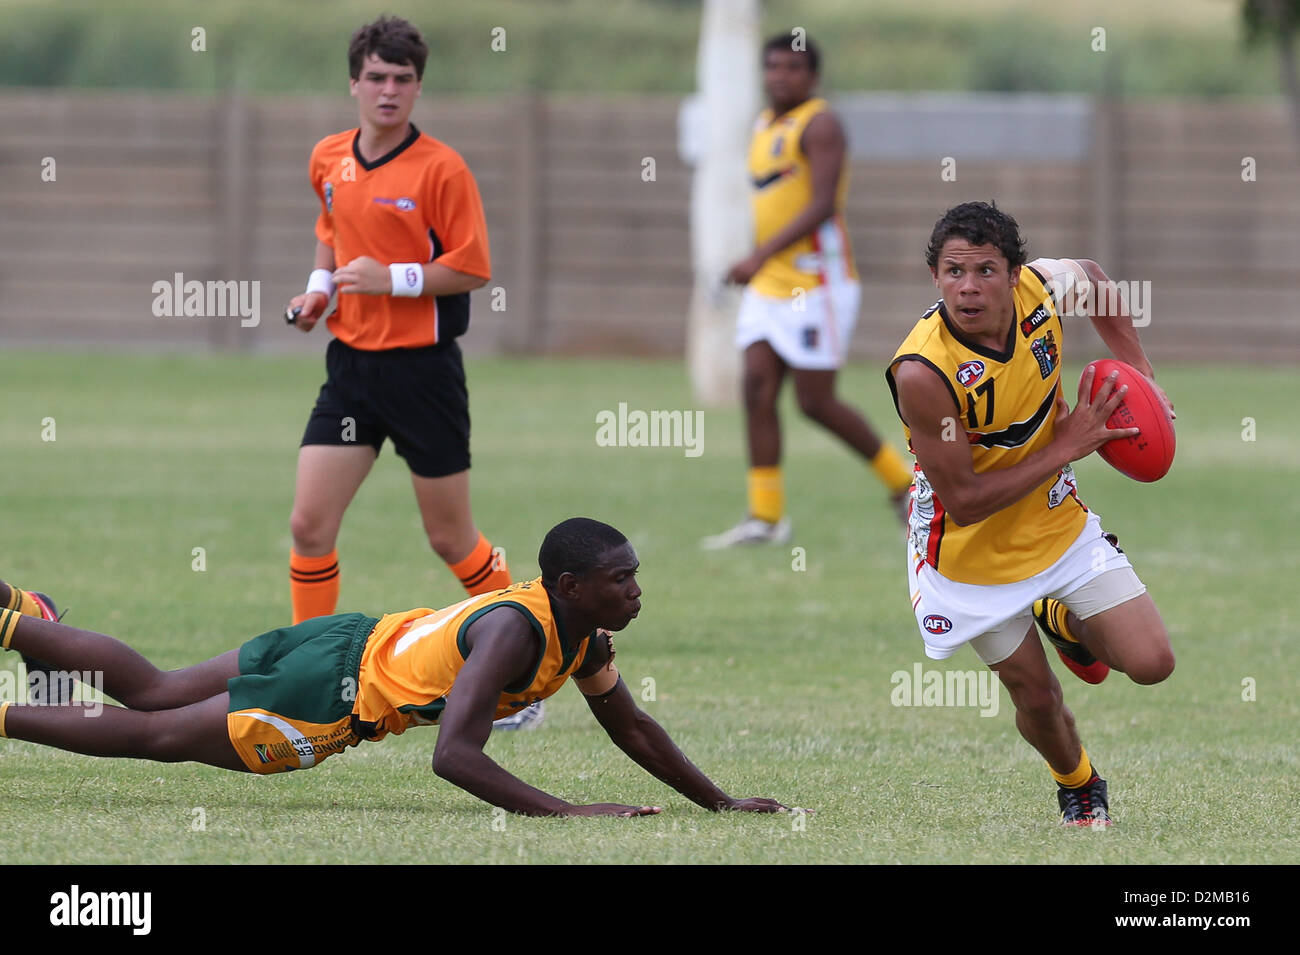 POTCHEFSTROOM, SOUTH AFRICA - JANUARY 28, Cory Glass (Chirnside Park, VIC) of the Australian Boomerangs evades a tackle during the AFL Game 1 match between the Flying Boomerangs and South African Lions under 18's at Mohadin Cricket Ground on January 28, 2013 in Potchefstroom, South Africa Photo by Roger Sedres / Image SA Stock Photo